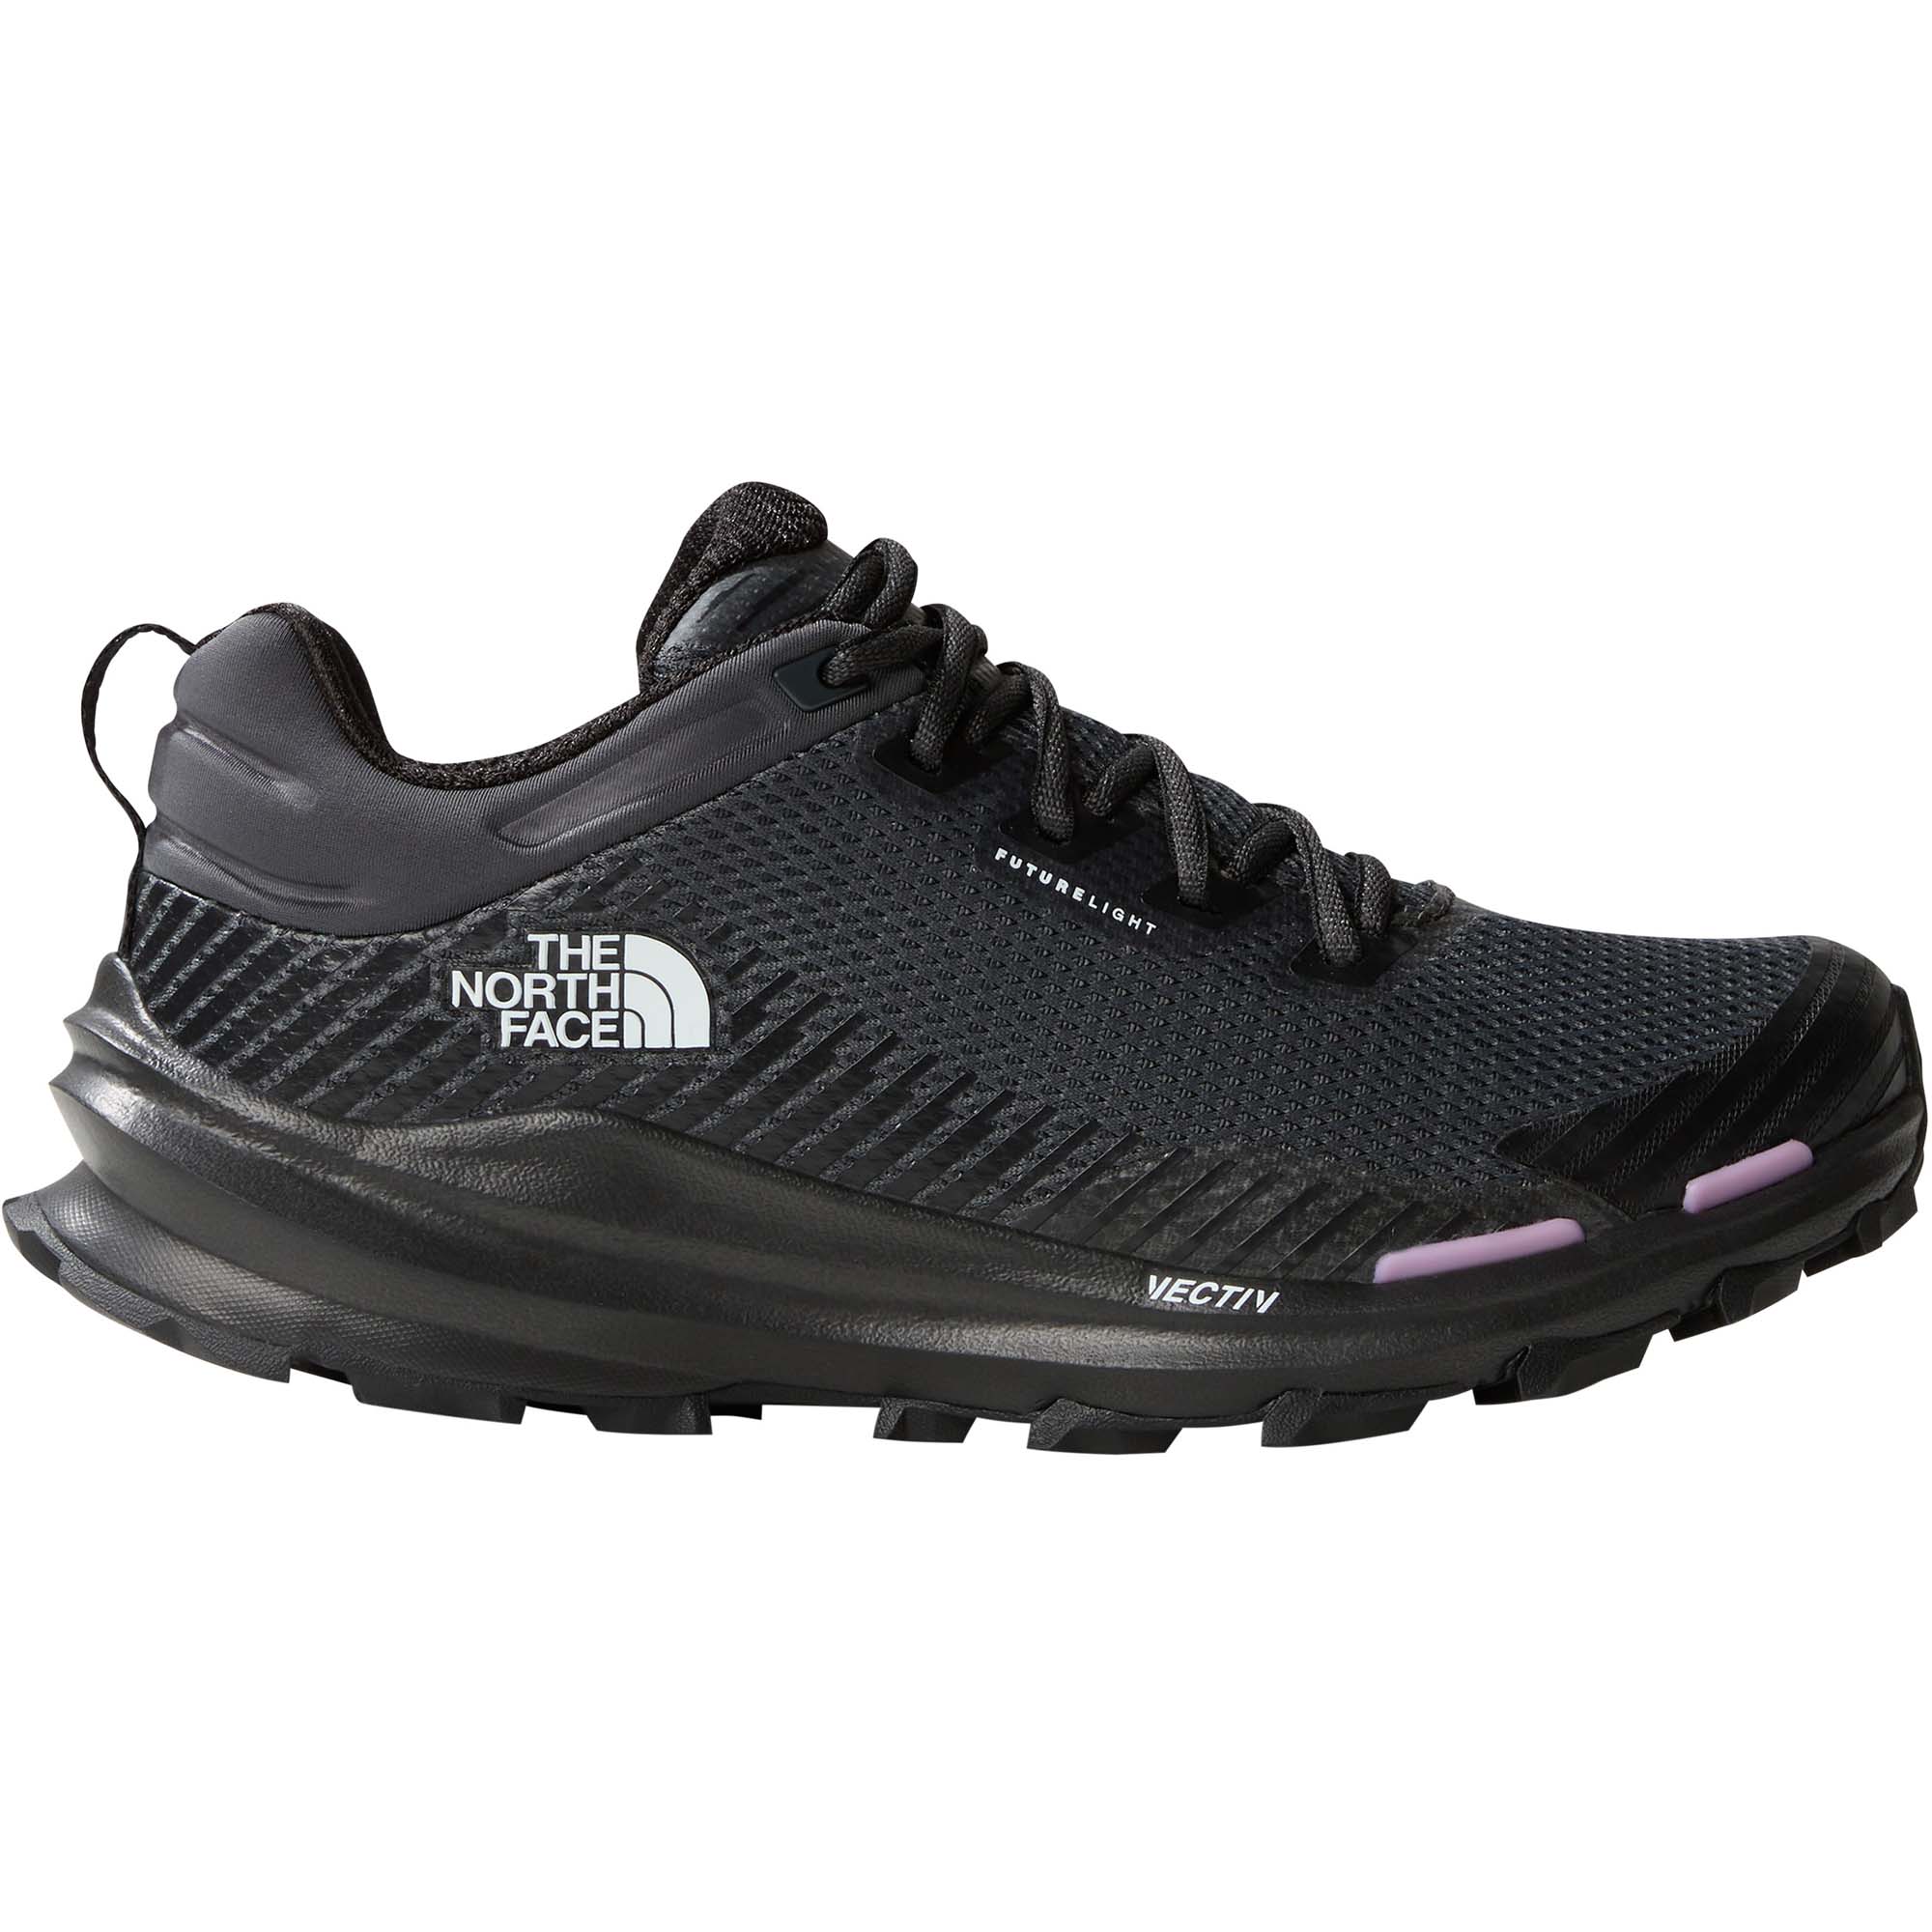 The North Face Vectiv Fastpack FL Women's Hiking Shoes